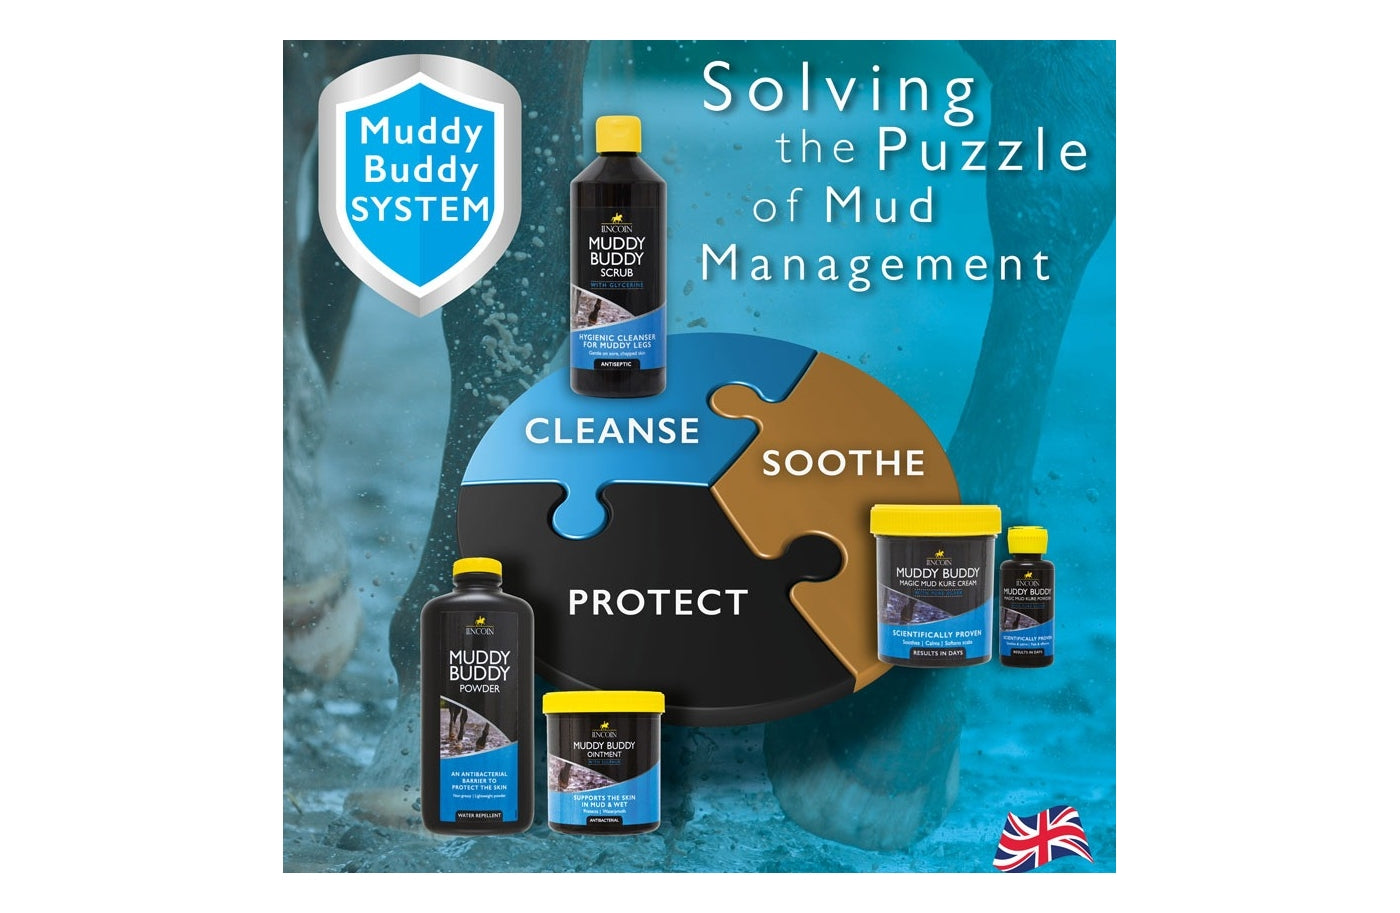 Lincoln Muddy Buddy Powder Products - Buy Online SPR Centre UK